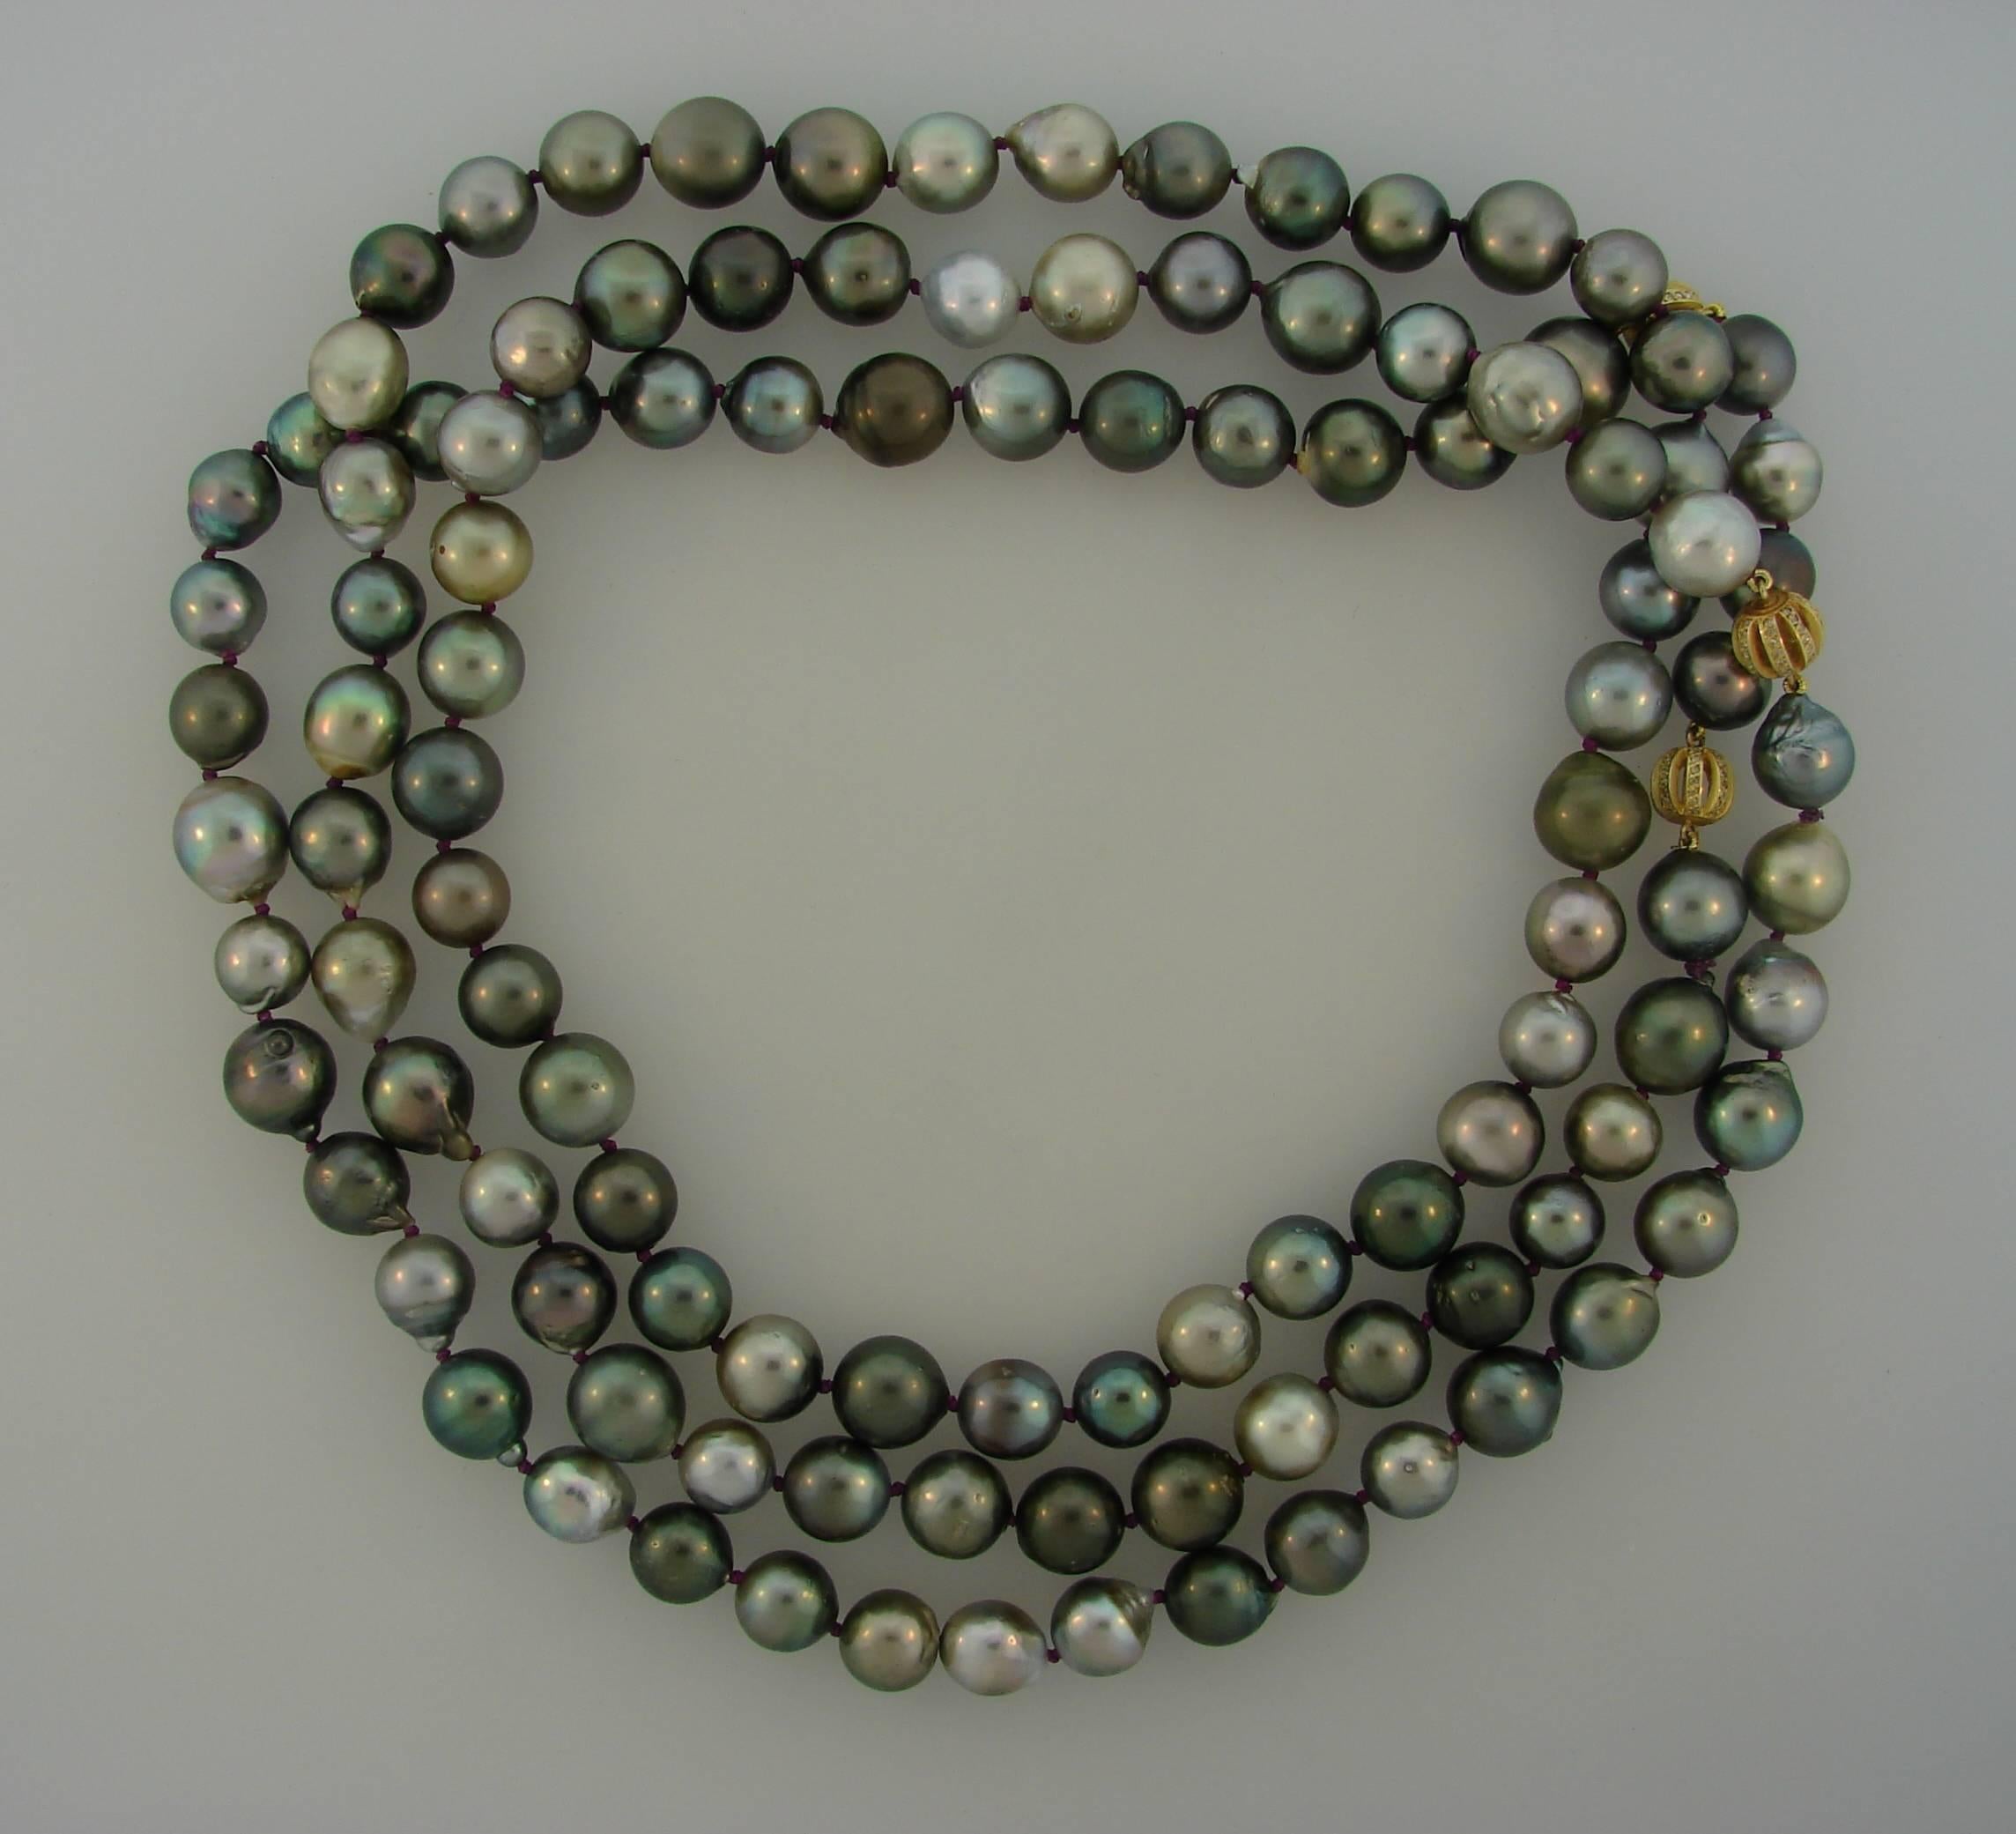 Chic and versatile Tahitian pearl necklace created by L. Frank. It can lay as one long strand or turn once or twice around a neck. The pearls come in all shades of gray and some of them have warm golden hue. There are three diamond & yellow gold